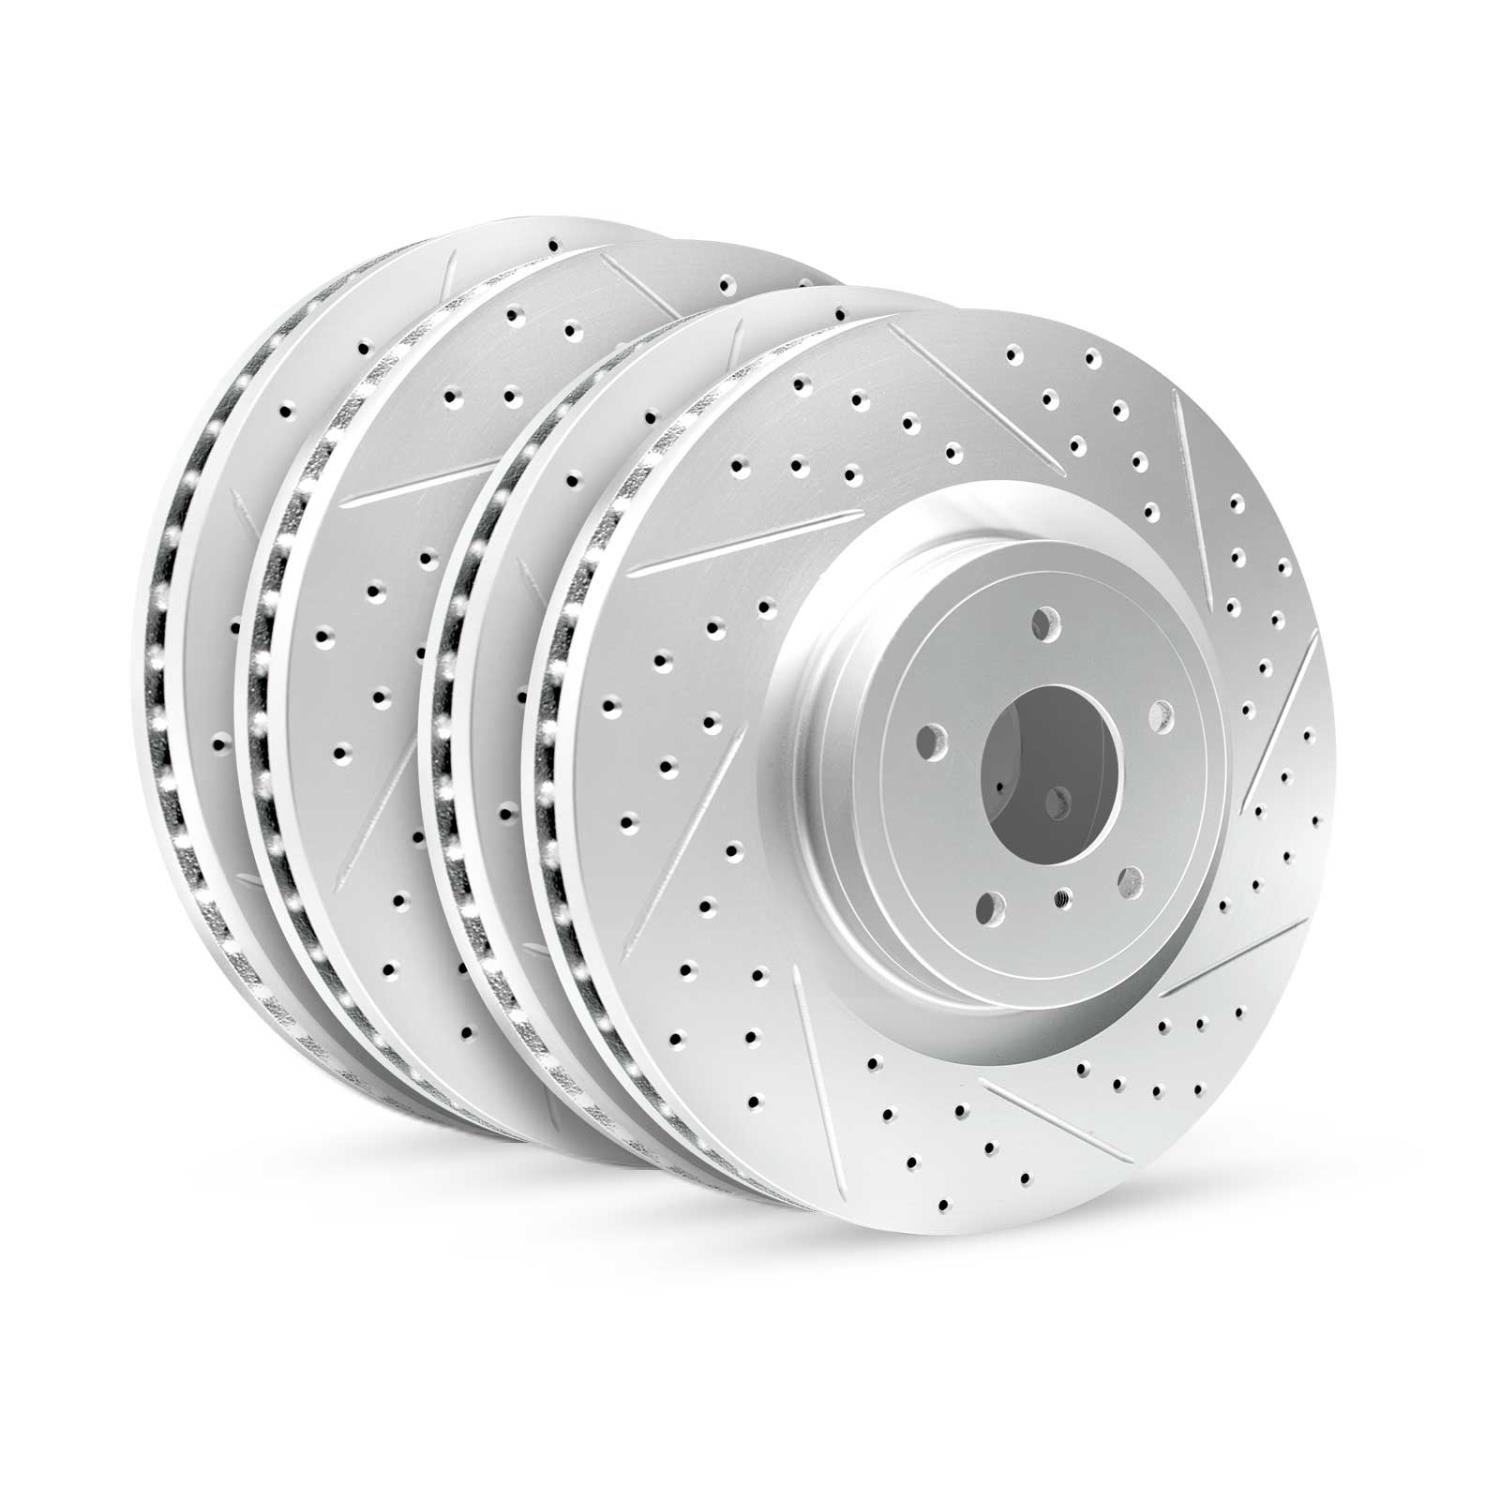 GEO-Carbon Drilled/Slotted Rotors, Fits Select Acura/Honda,